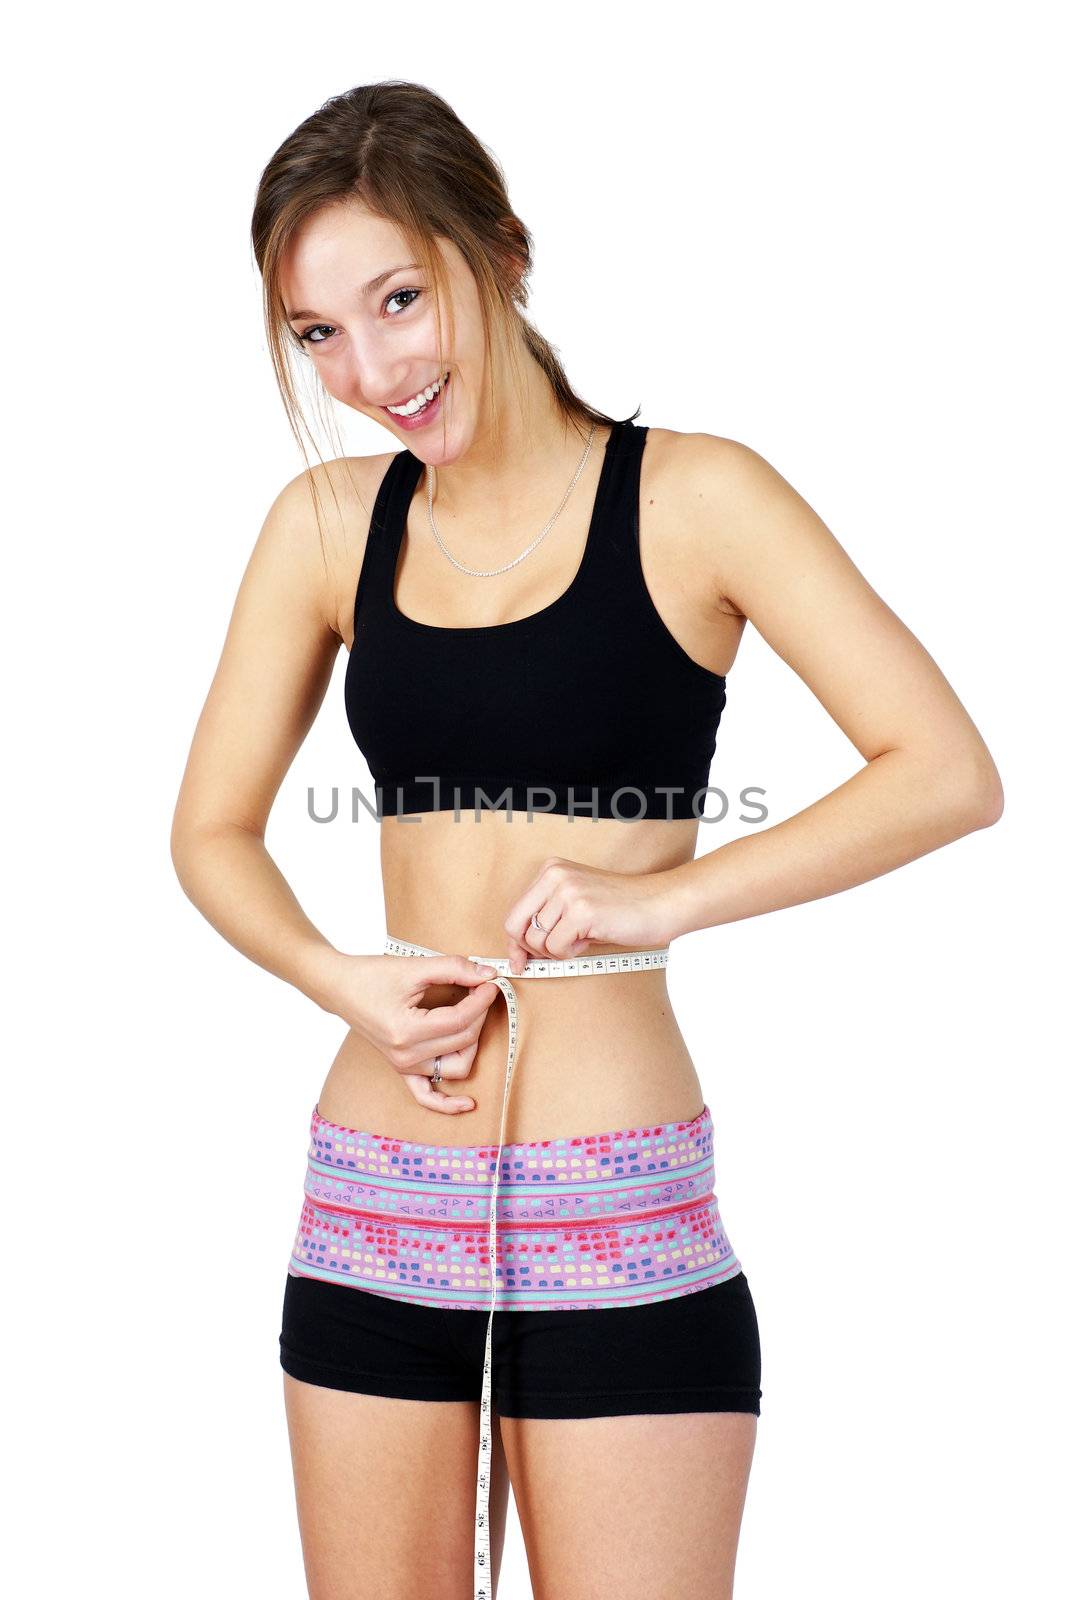 Pretty, sporty and fit young woman in work out clothes happy over waist measurements, perfect for health issues.